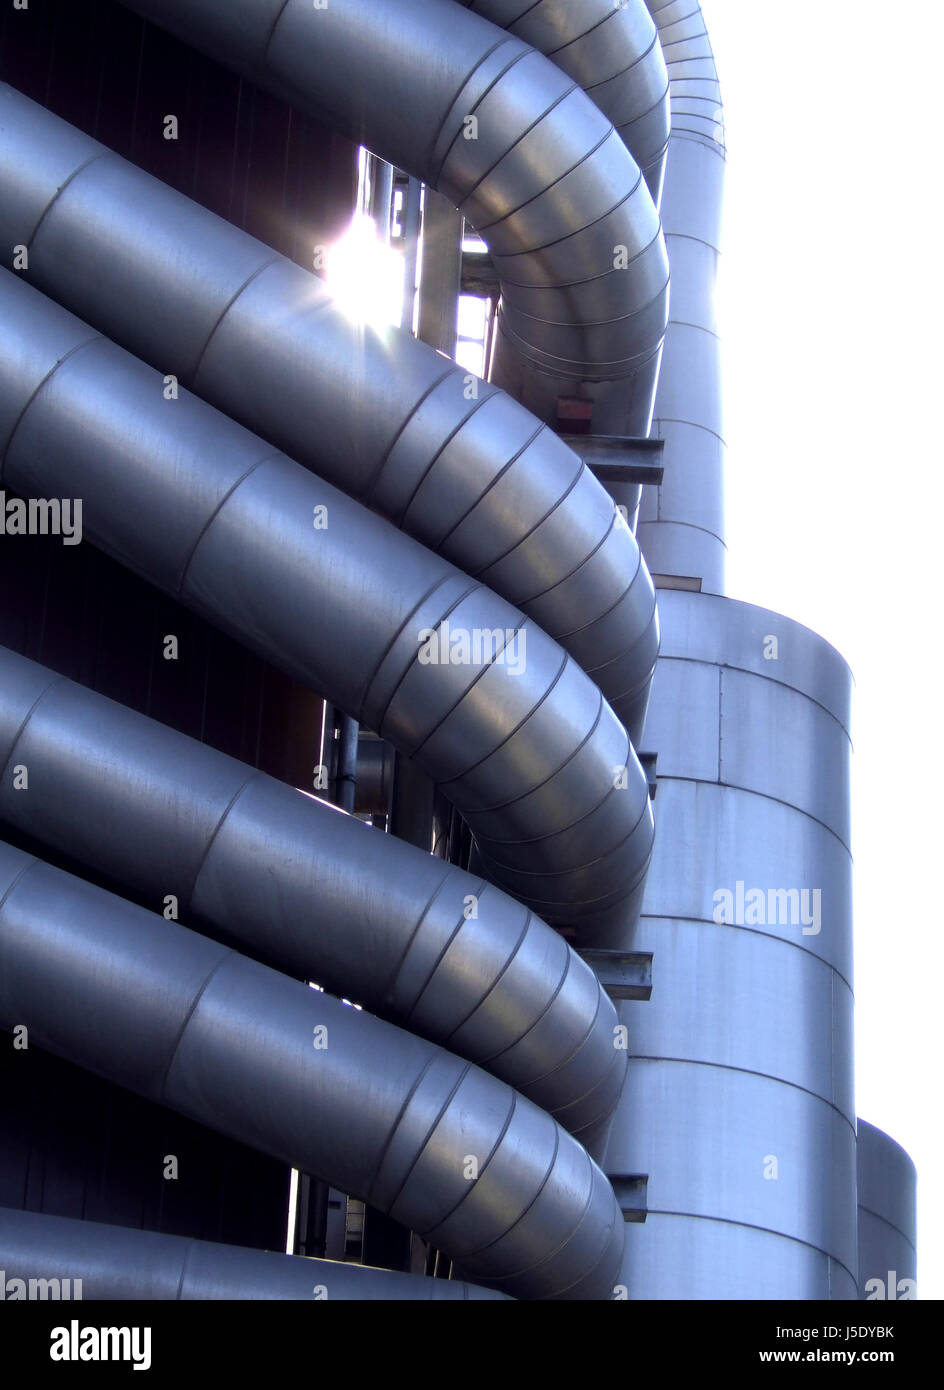 detail industry industrial plant detail admission high-grade steel Stock Photo